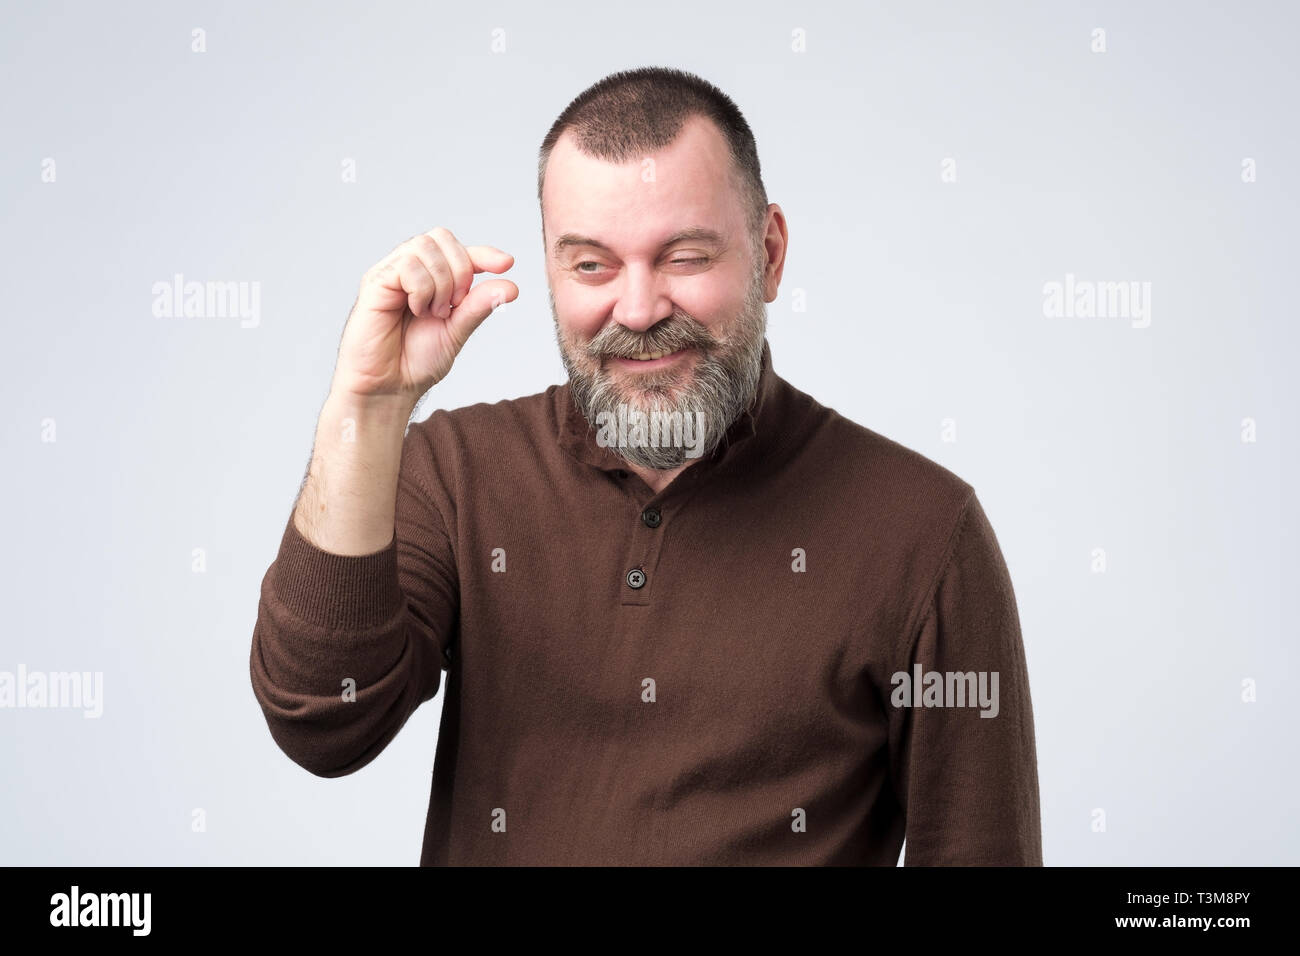 Mature man gesturing with hand montrant petite taille Banque D'Images